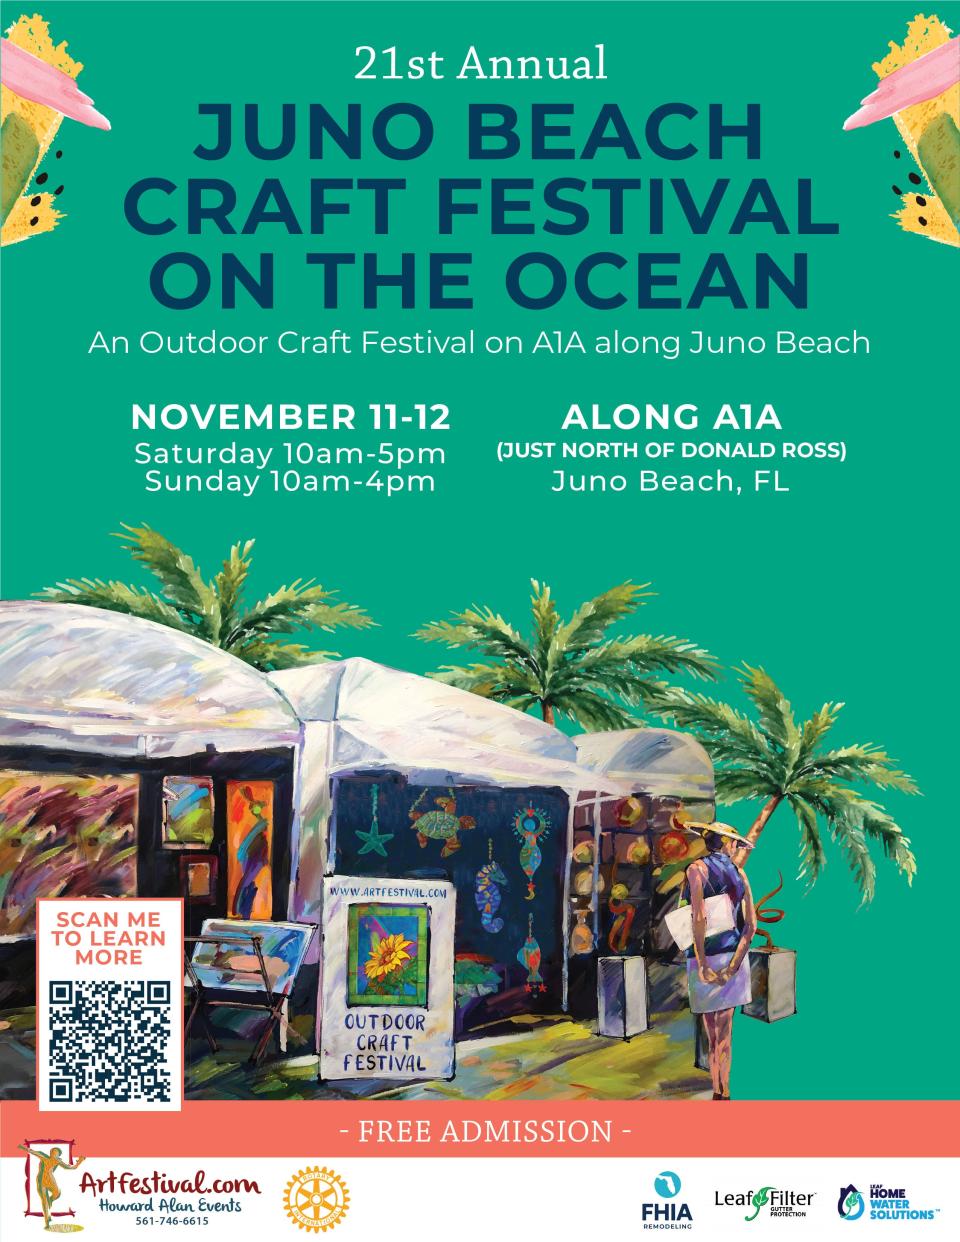 The 21st annual Juno Beach Craft Festival on the Ocean will be held Nov. 4 and 5 along A1A just north of Donald Ross Road.